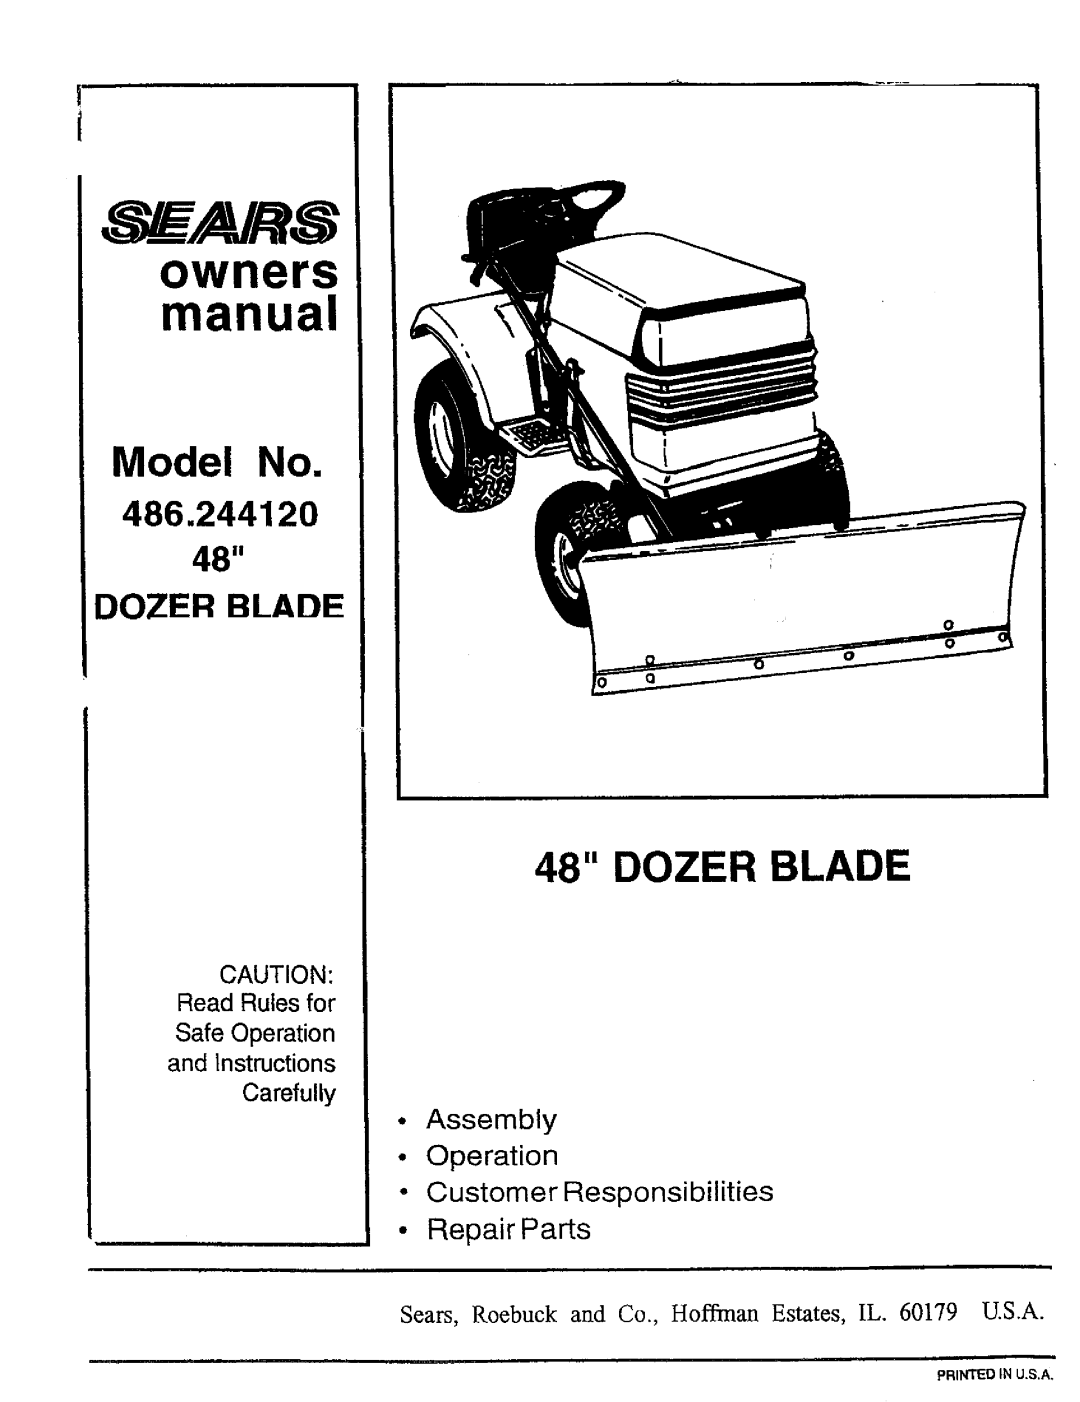 Sears owner manual Model No, Dozer Blade, 486.244120, Read Rules for Safe Operation, and Instructions, Carefully 